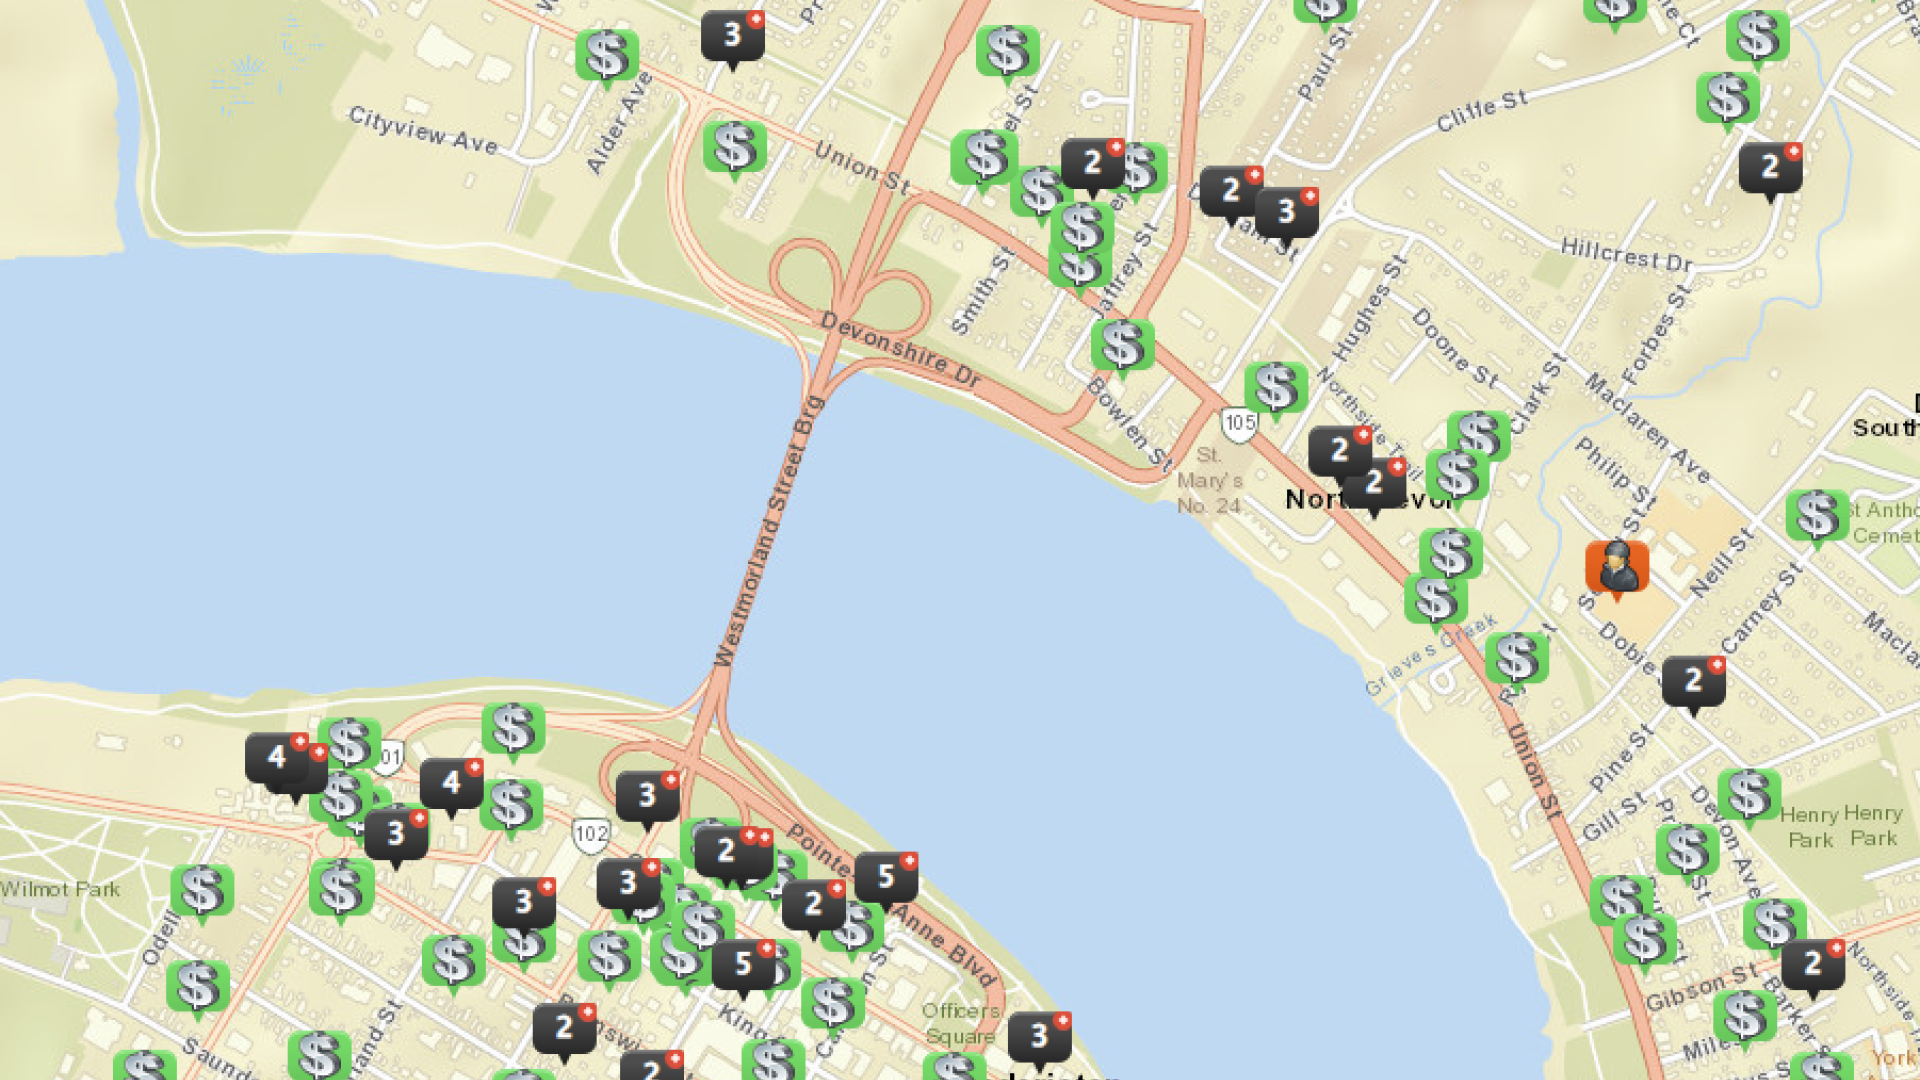 Map of Fredericton indicating reports of theft